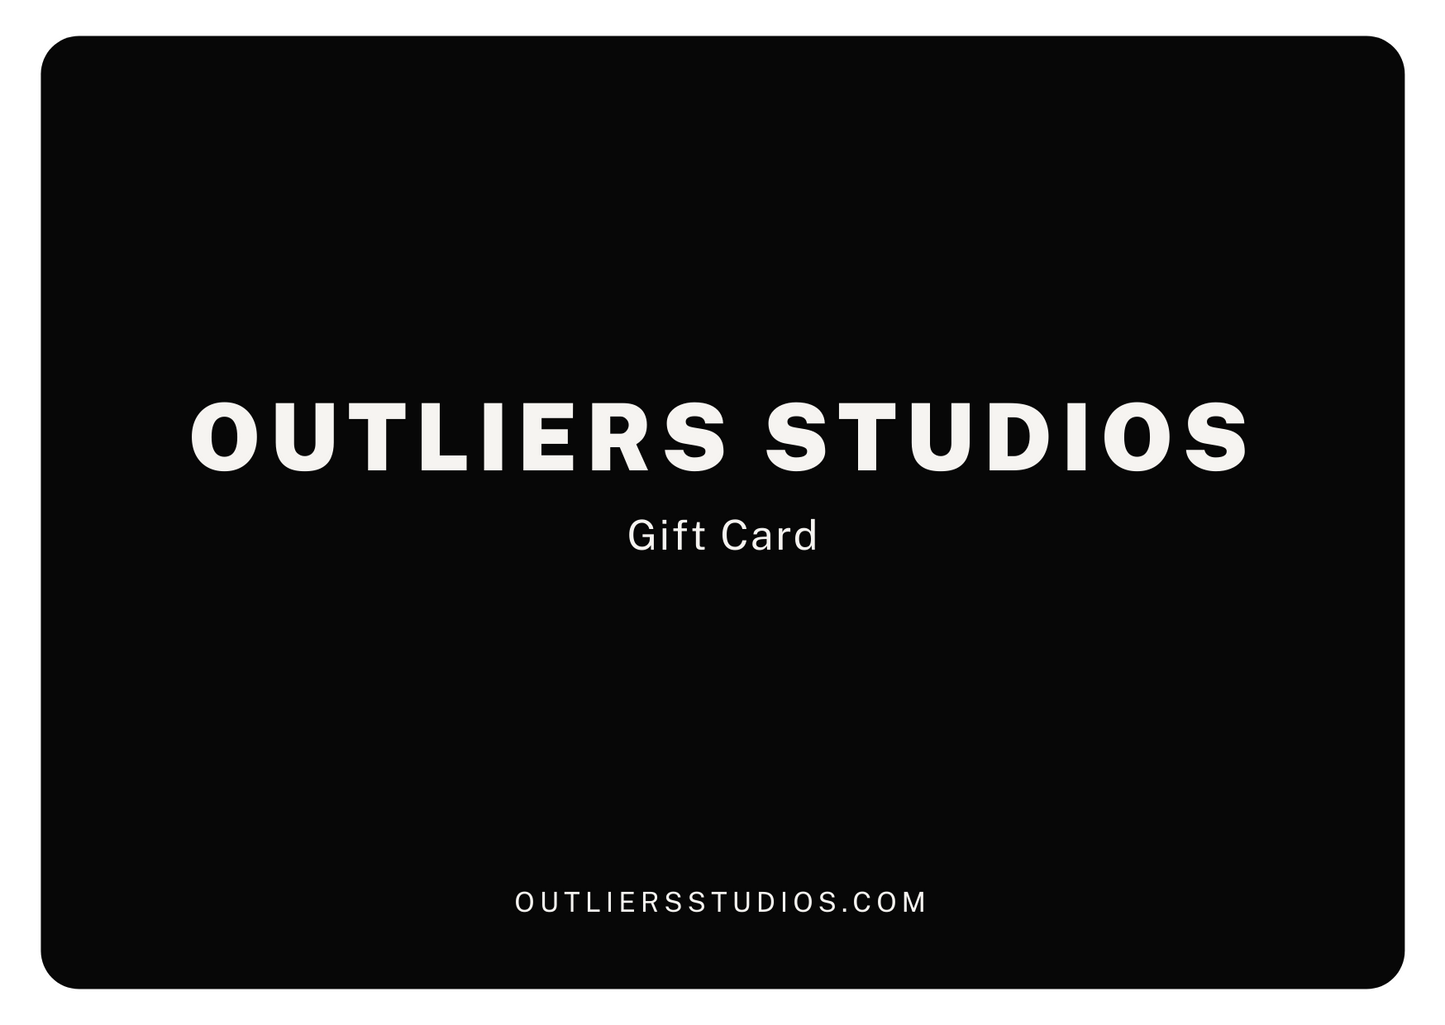 Outliers Gift Card